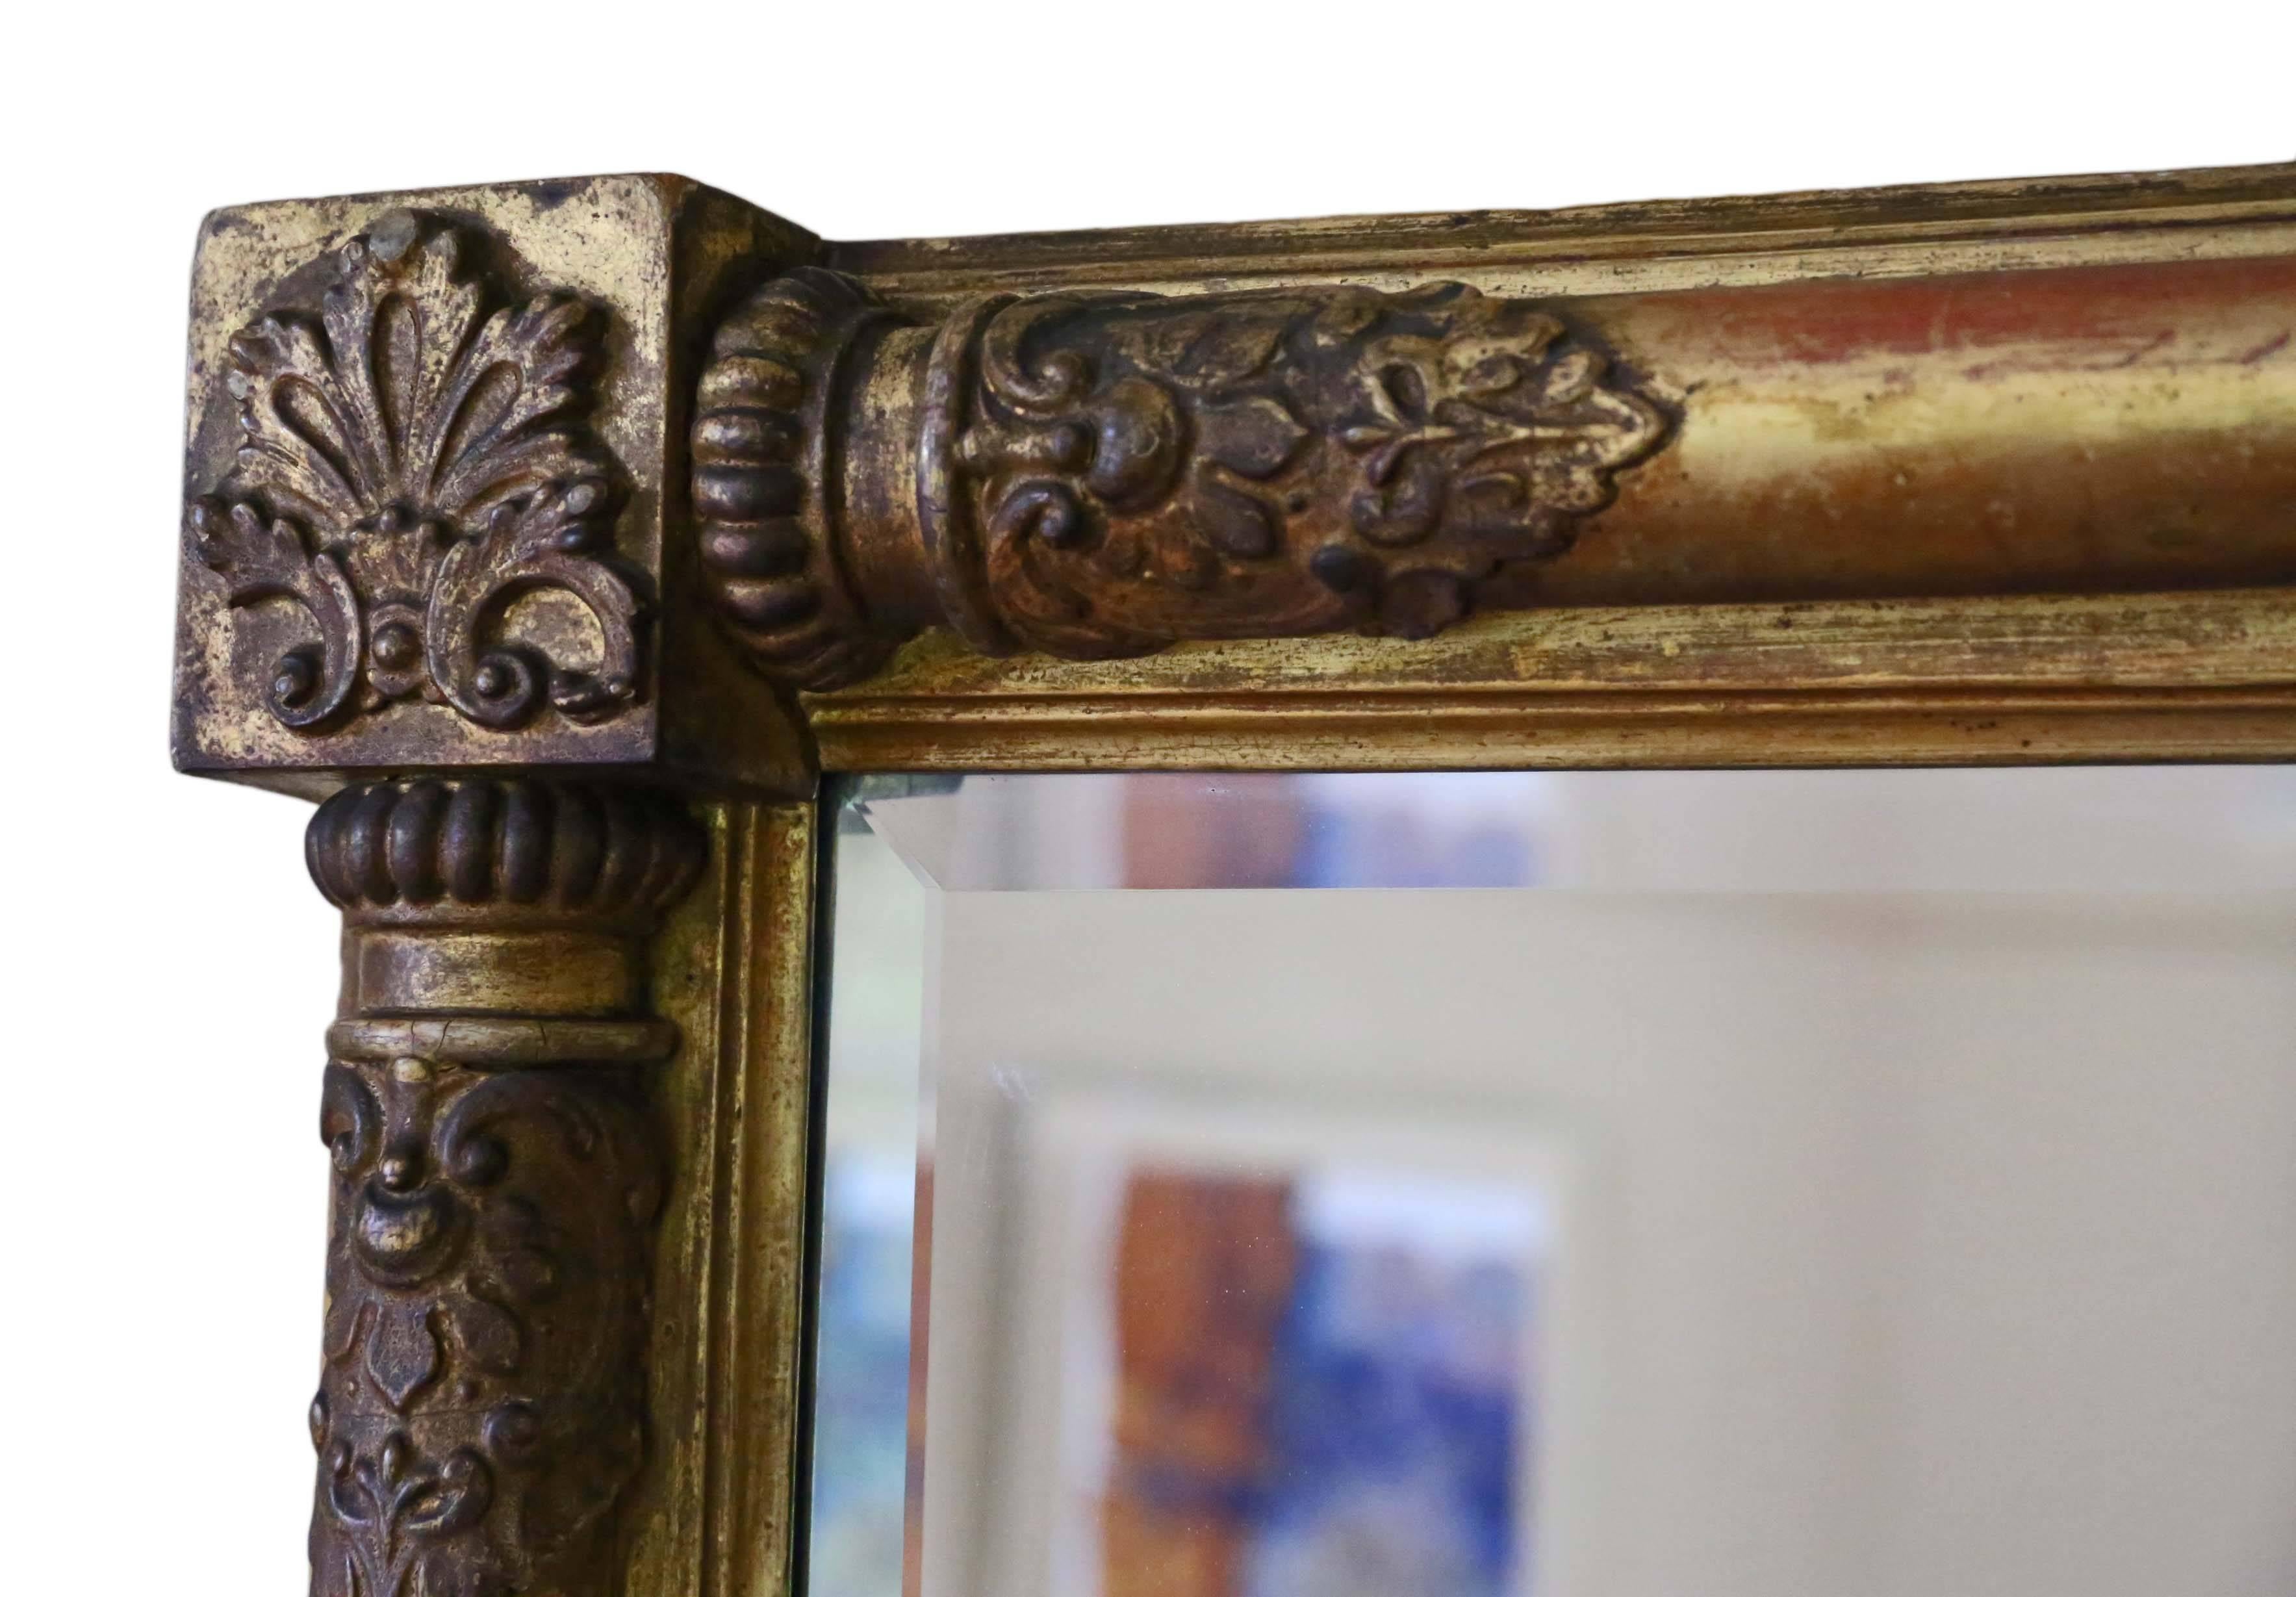 Antique large 19th century Victorian gilt overmantel wall mirror.

This is a lovely mirror, that is full of age, charm and character. Great patinated gilt frame which has been touched up here and there, but some of the original gilding remains on